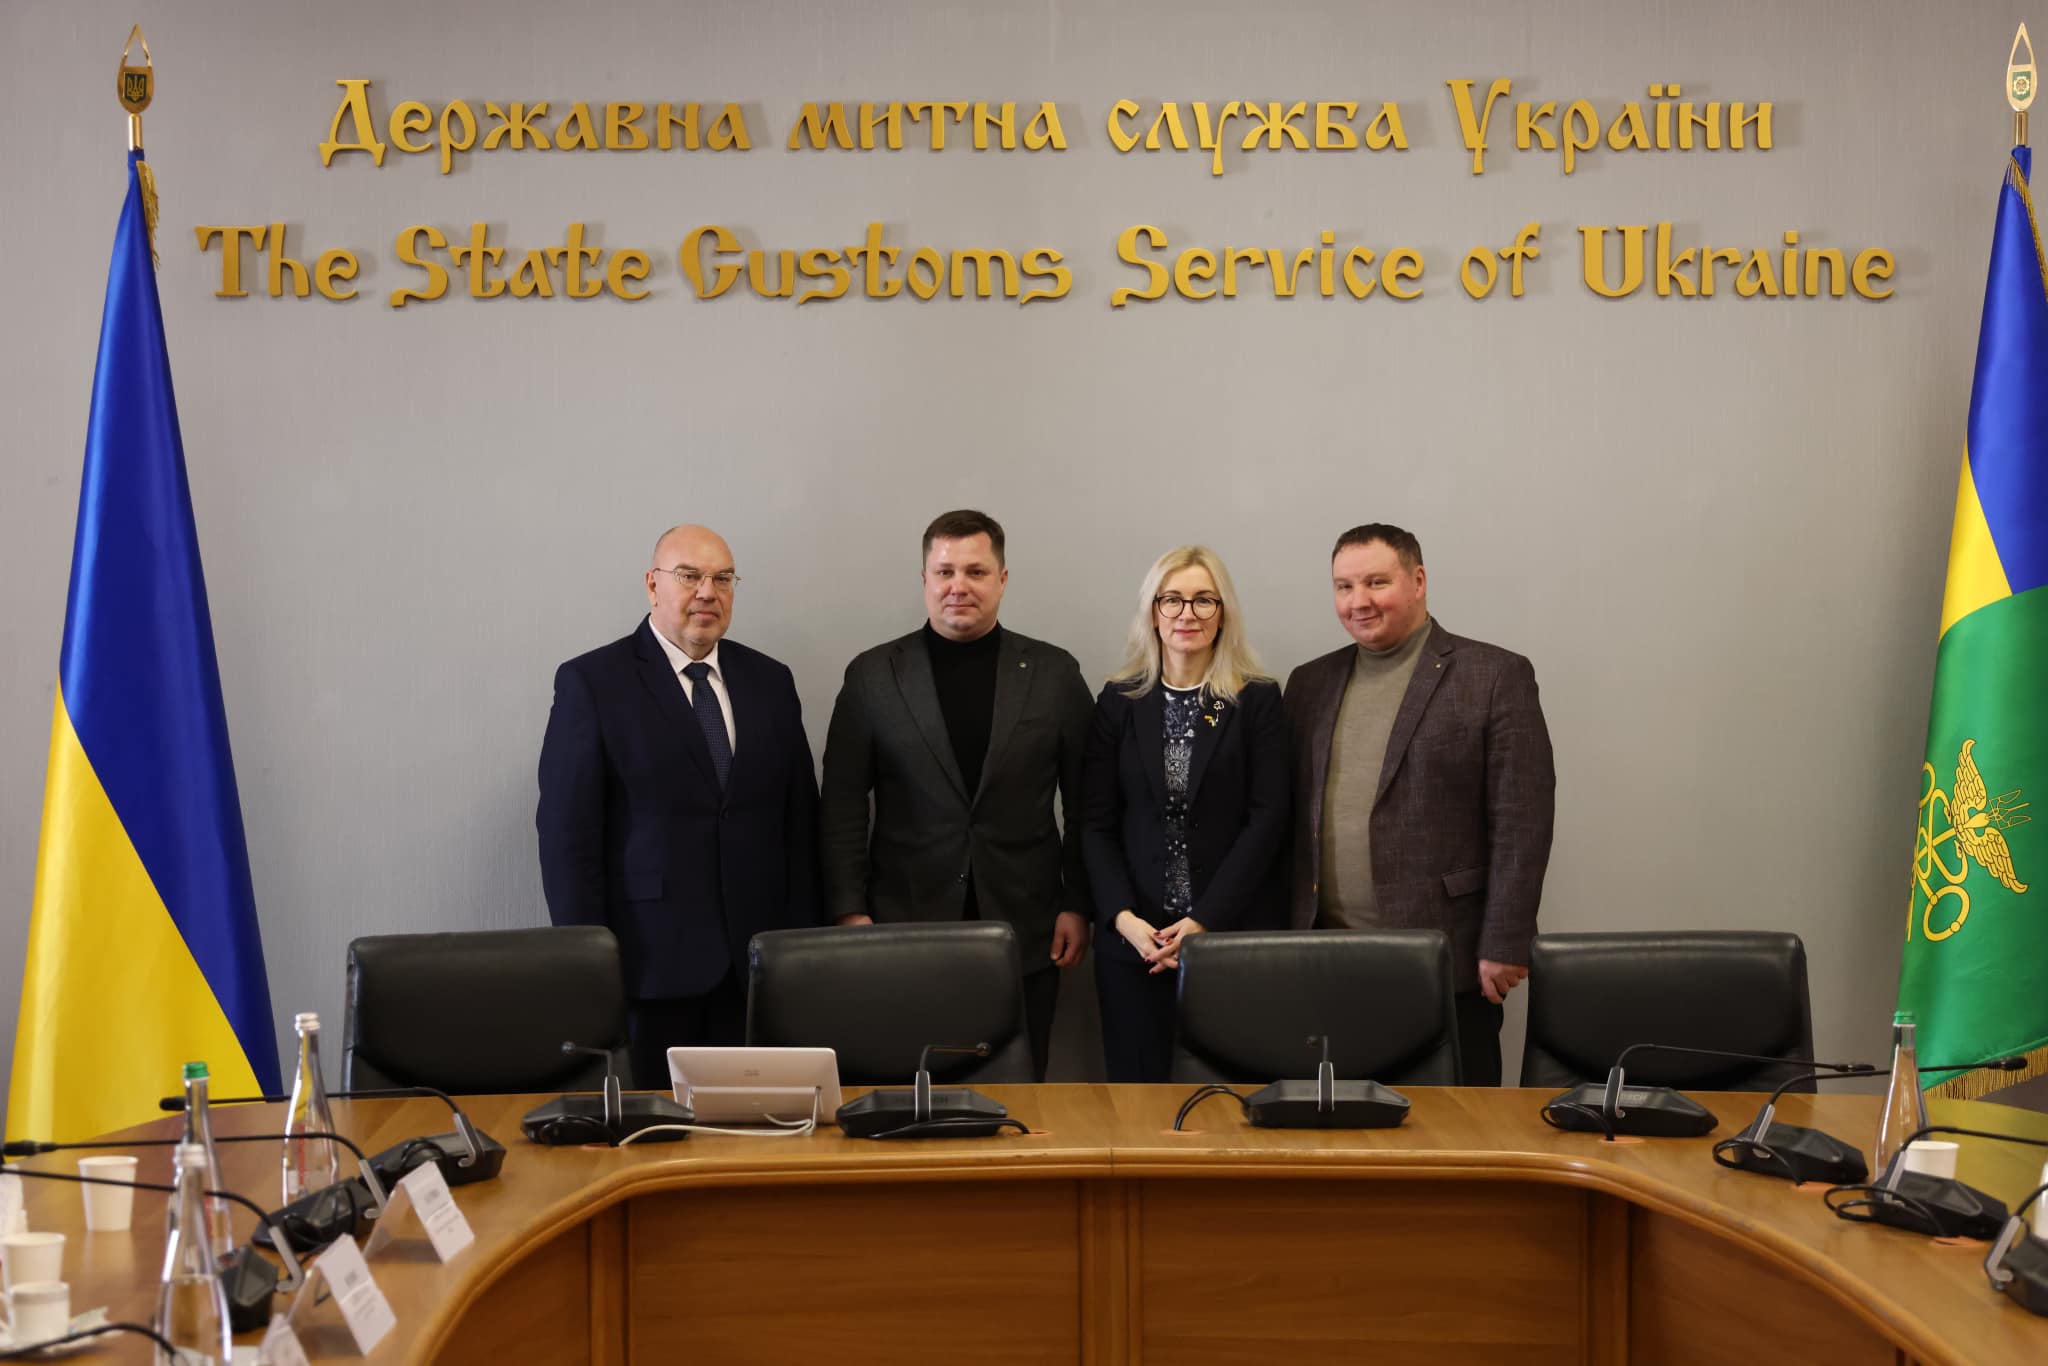 EU4PFM leadership in Kyiv discussed with representatives of the State Customs Service further support for customs reform on Ukraine’s path to the EU